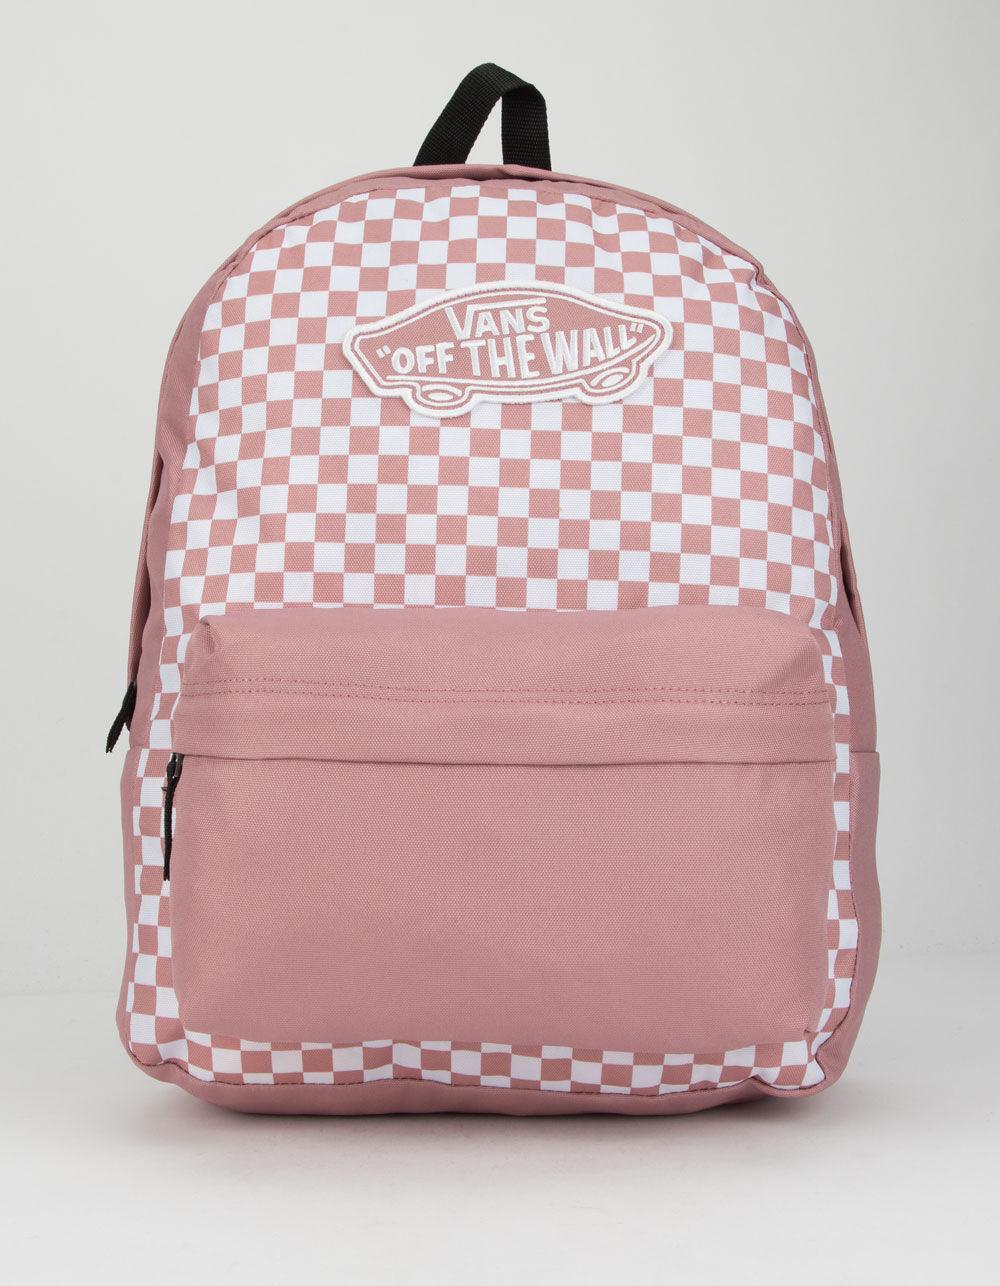 vans checkered pink backpack